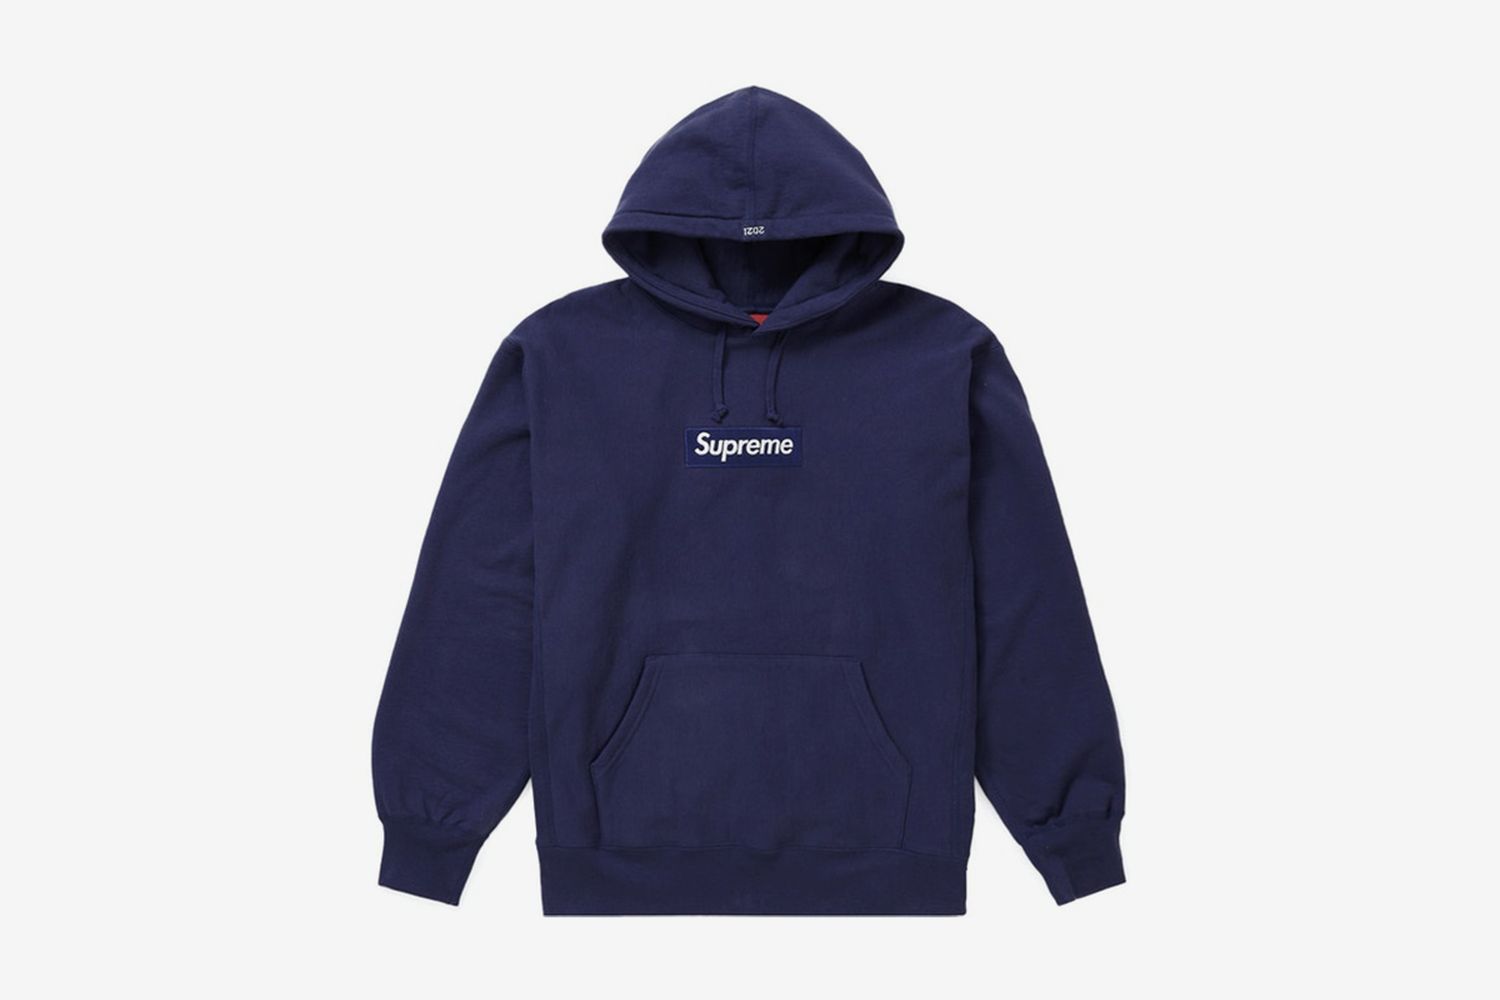 Fall/Winter 2021 Supreme Box Logo Hoodie: Where to Buy  Prices